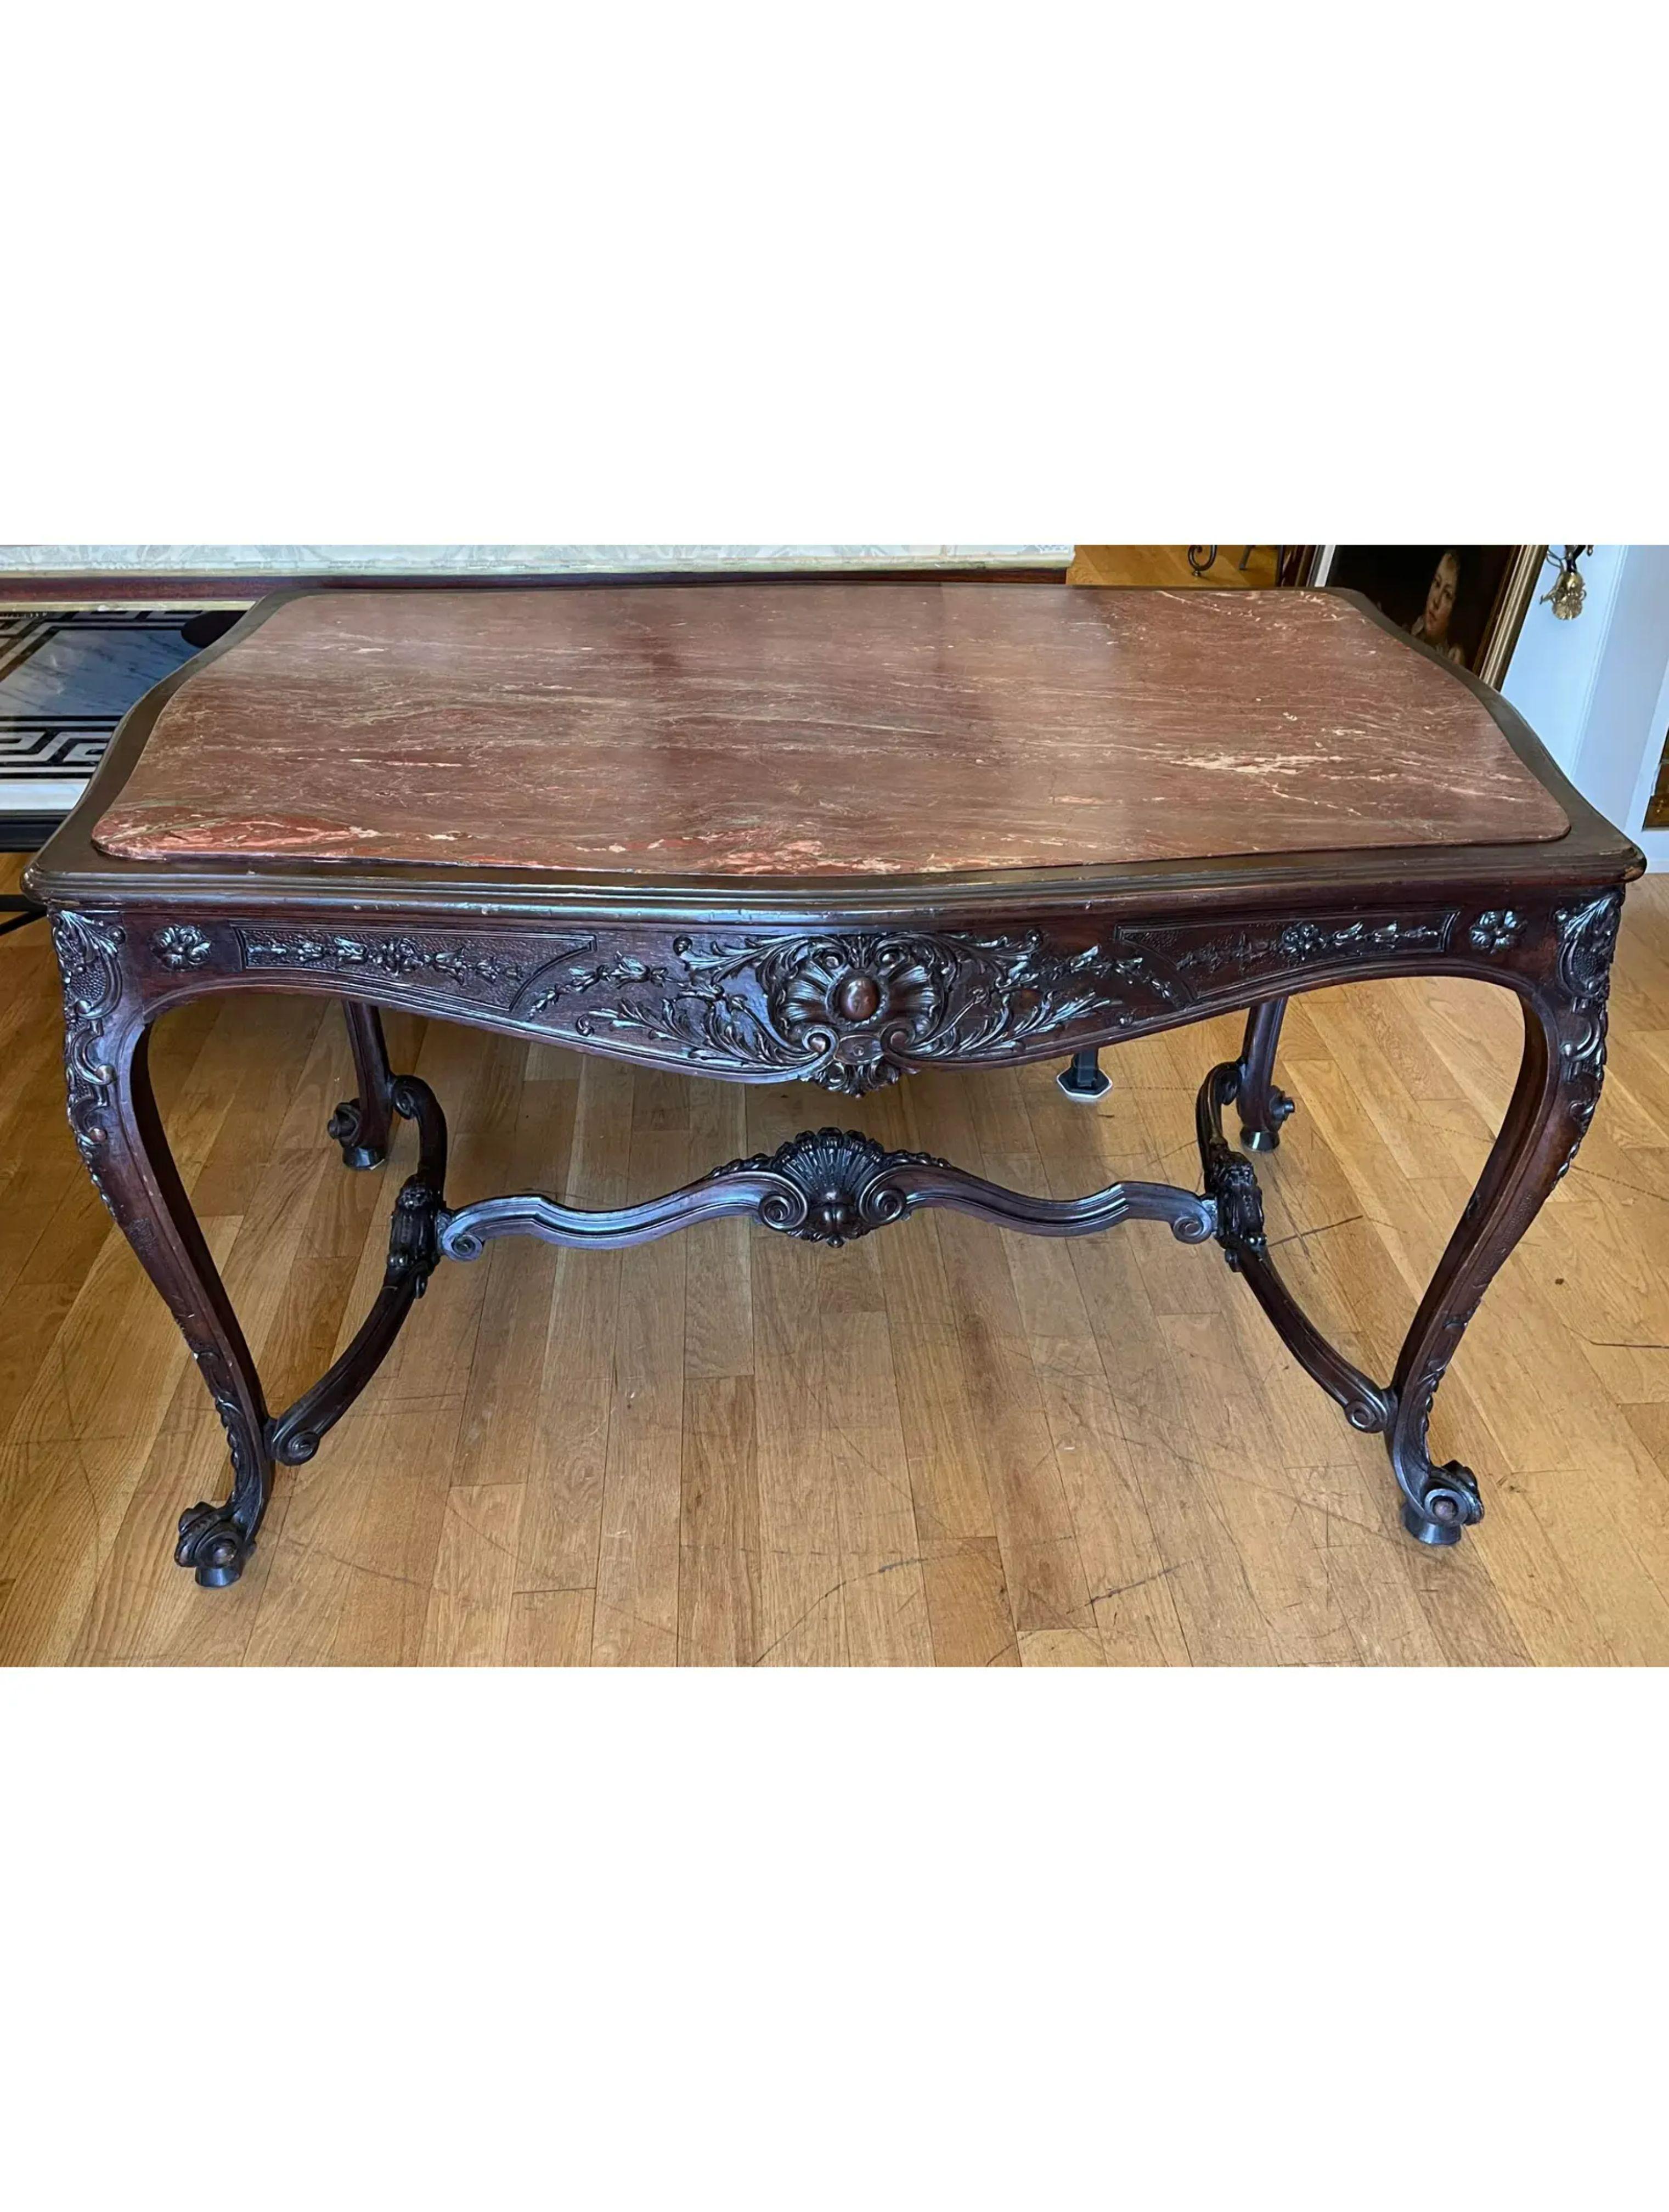 Antique French Provincial Marble Top Center Table, Early 19th Century For Sale 2